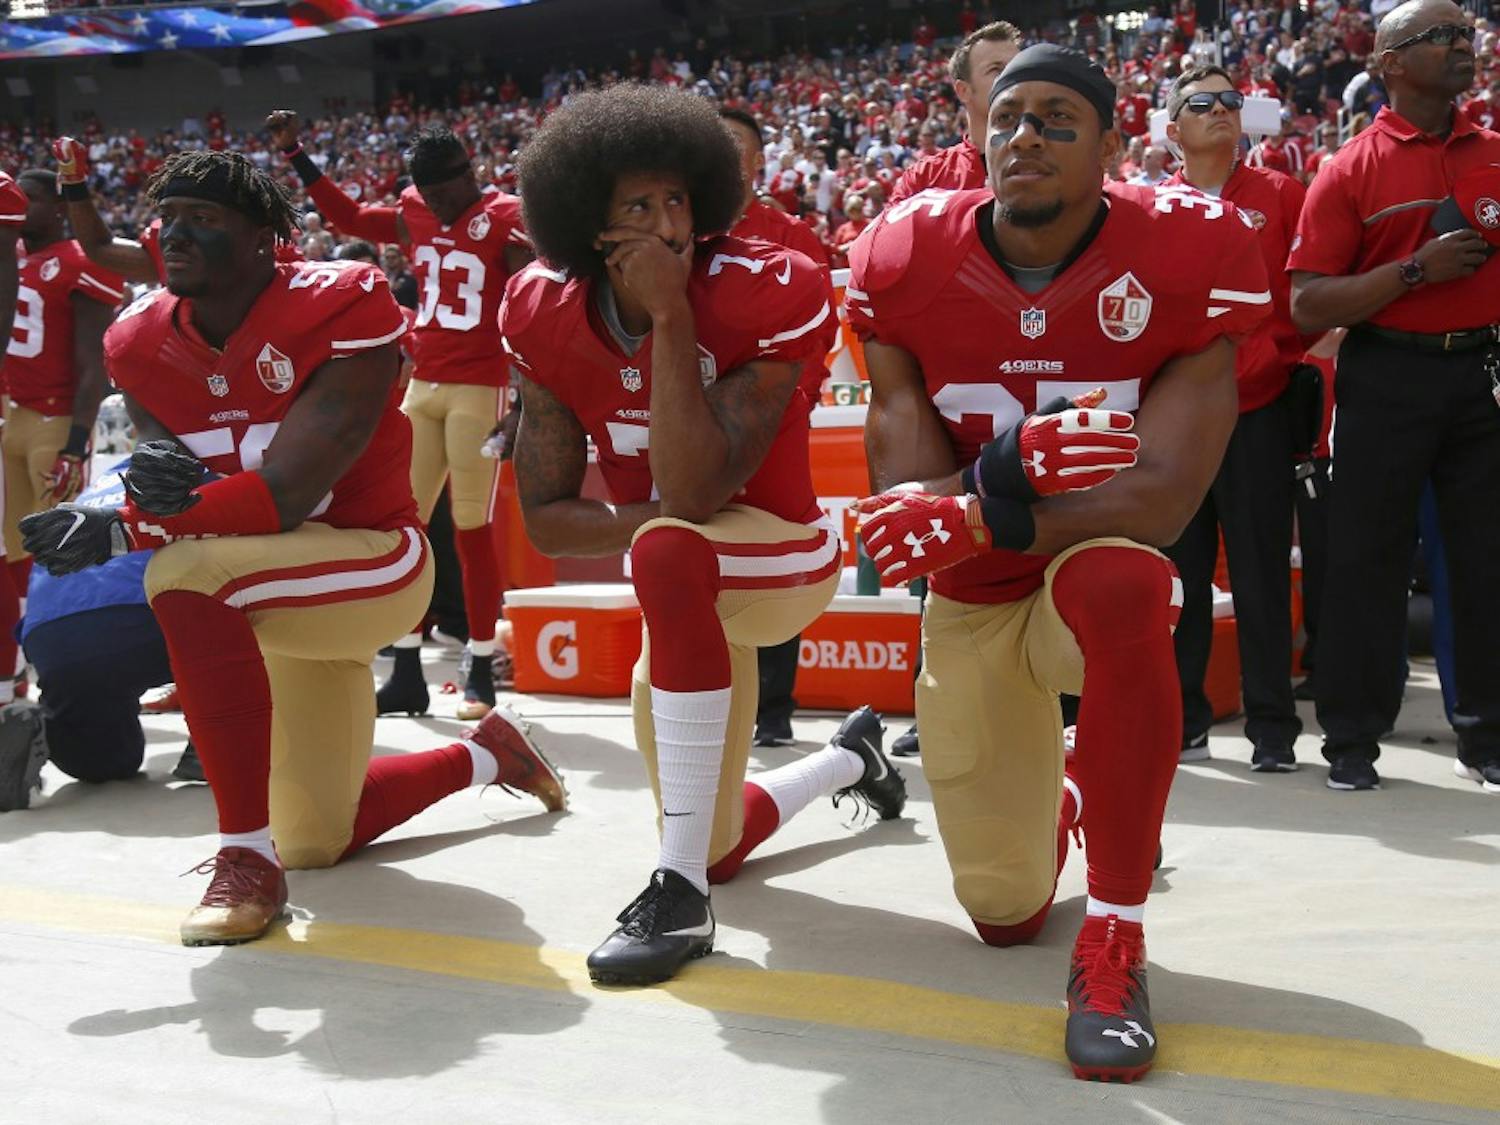 Football players, like all Americans, may protest